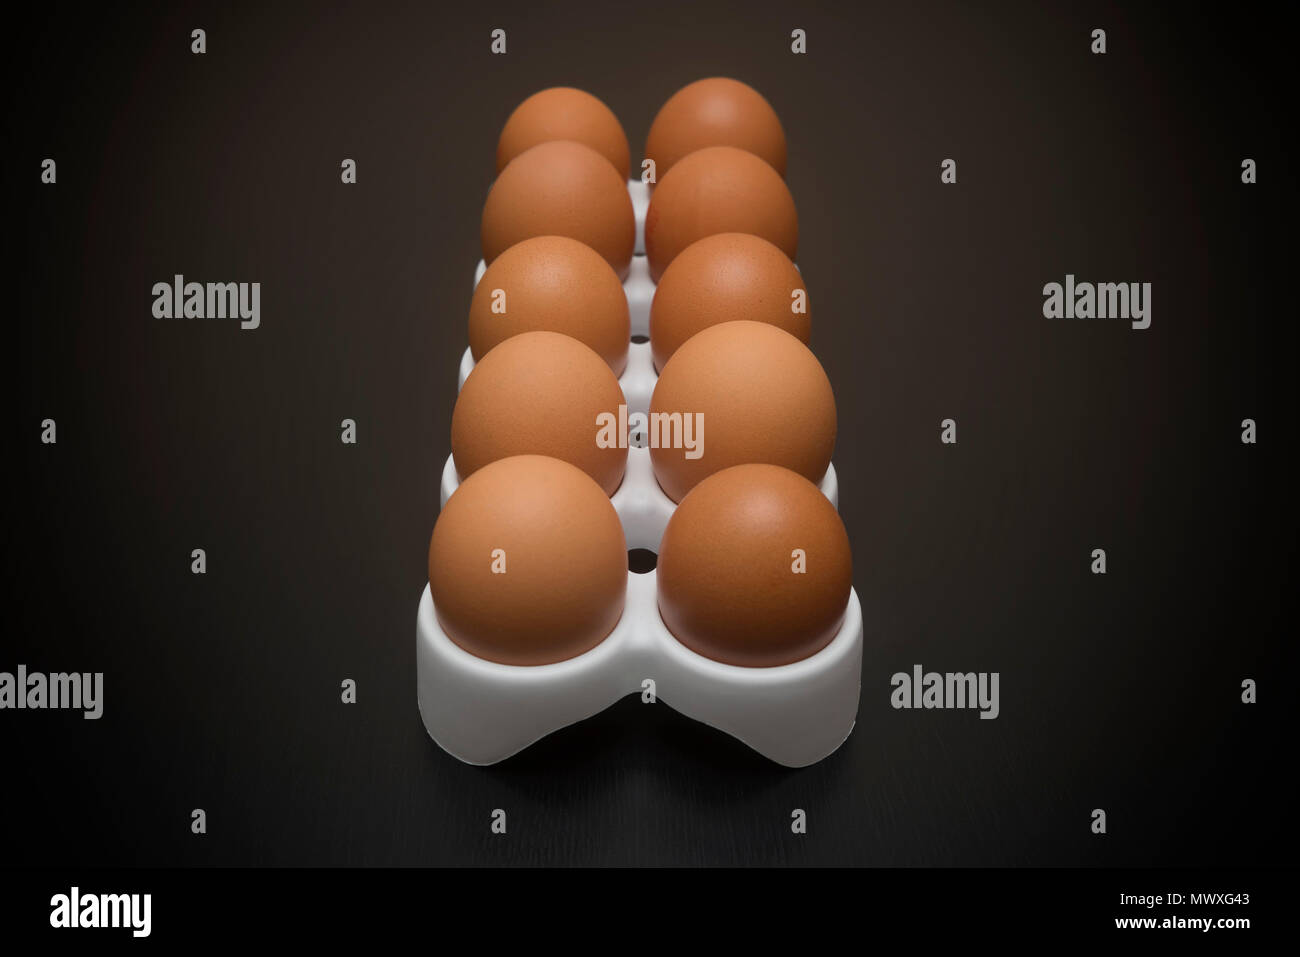 Group Of Brown Chicken Eggs Stock Photo